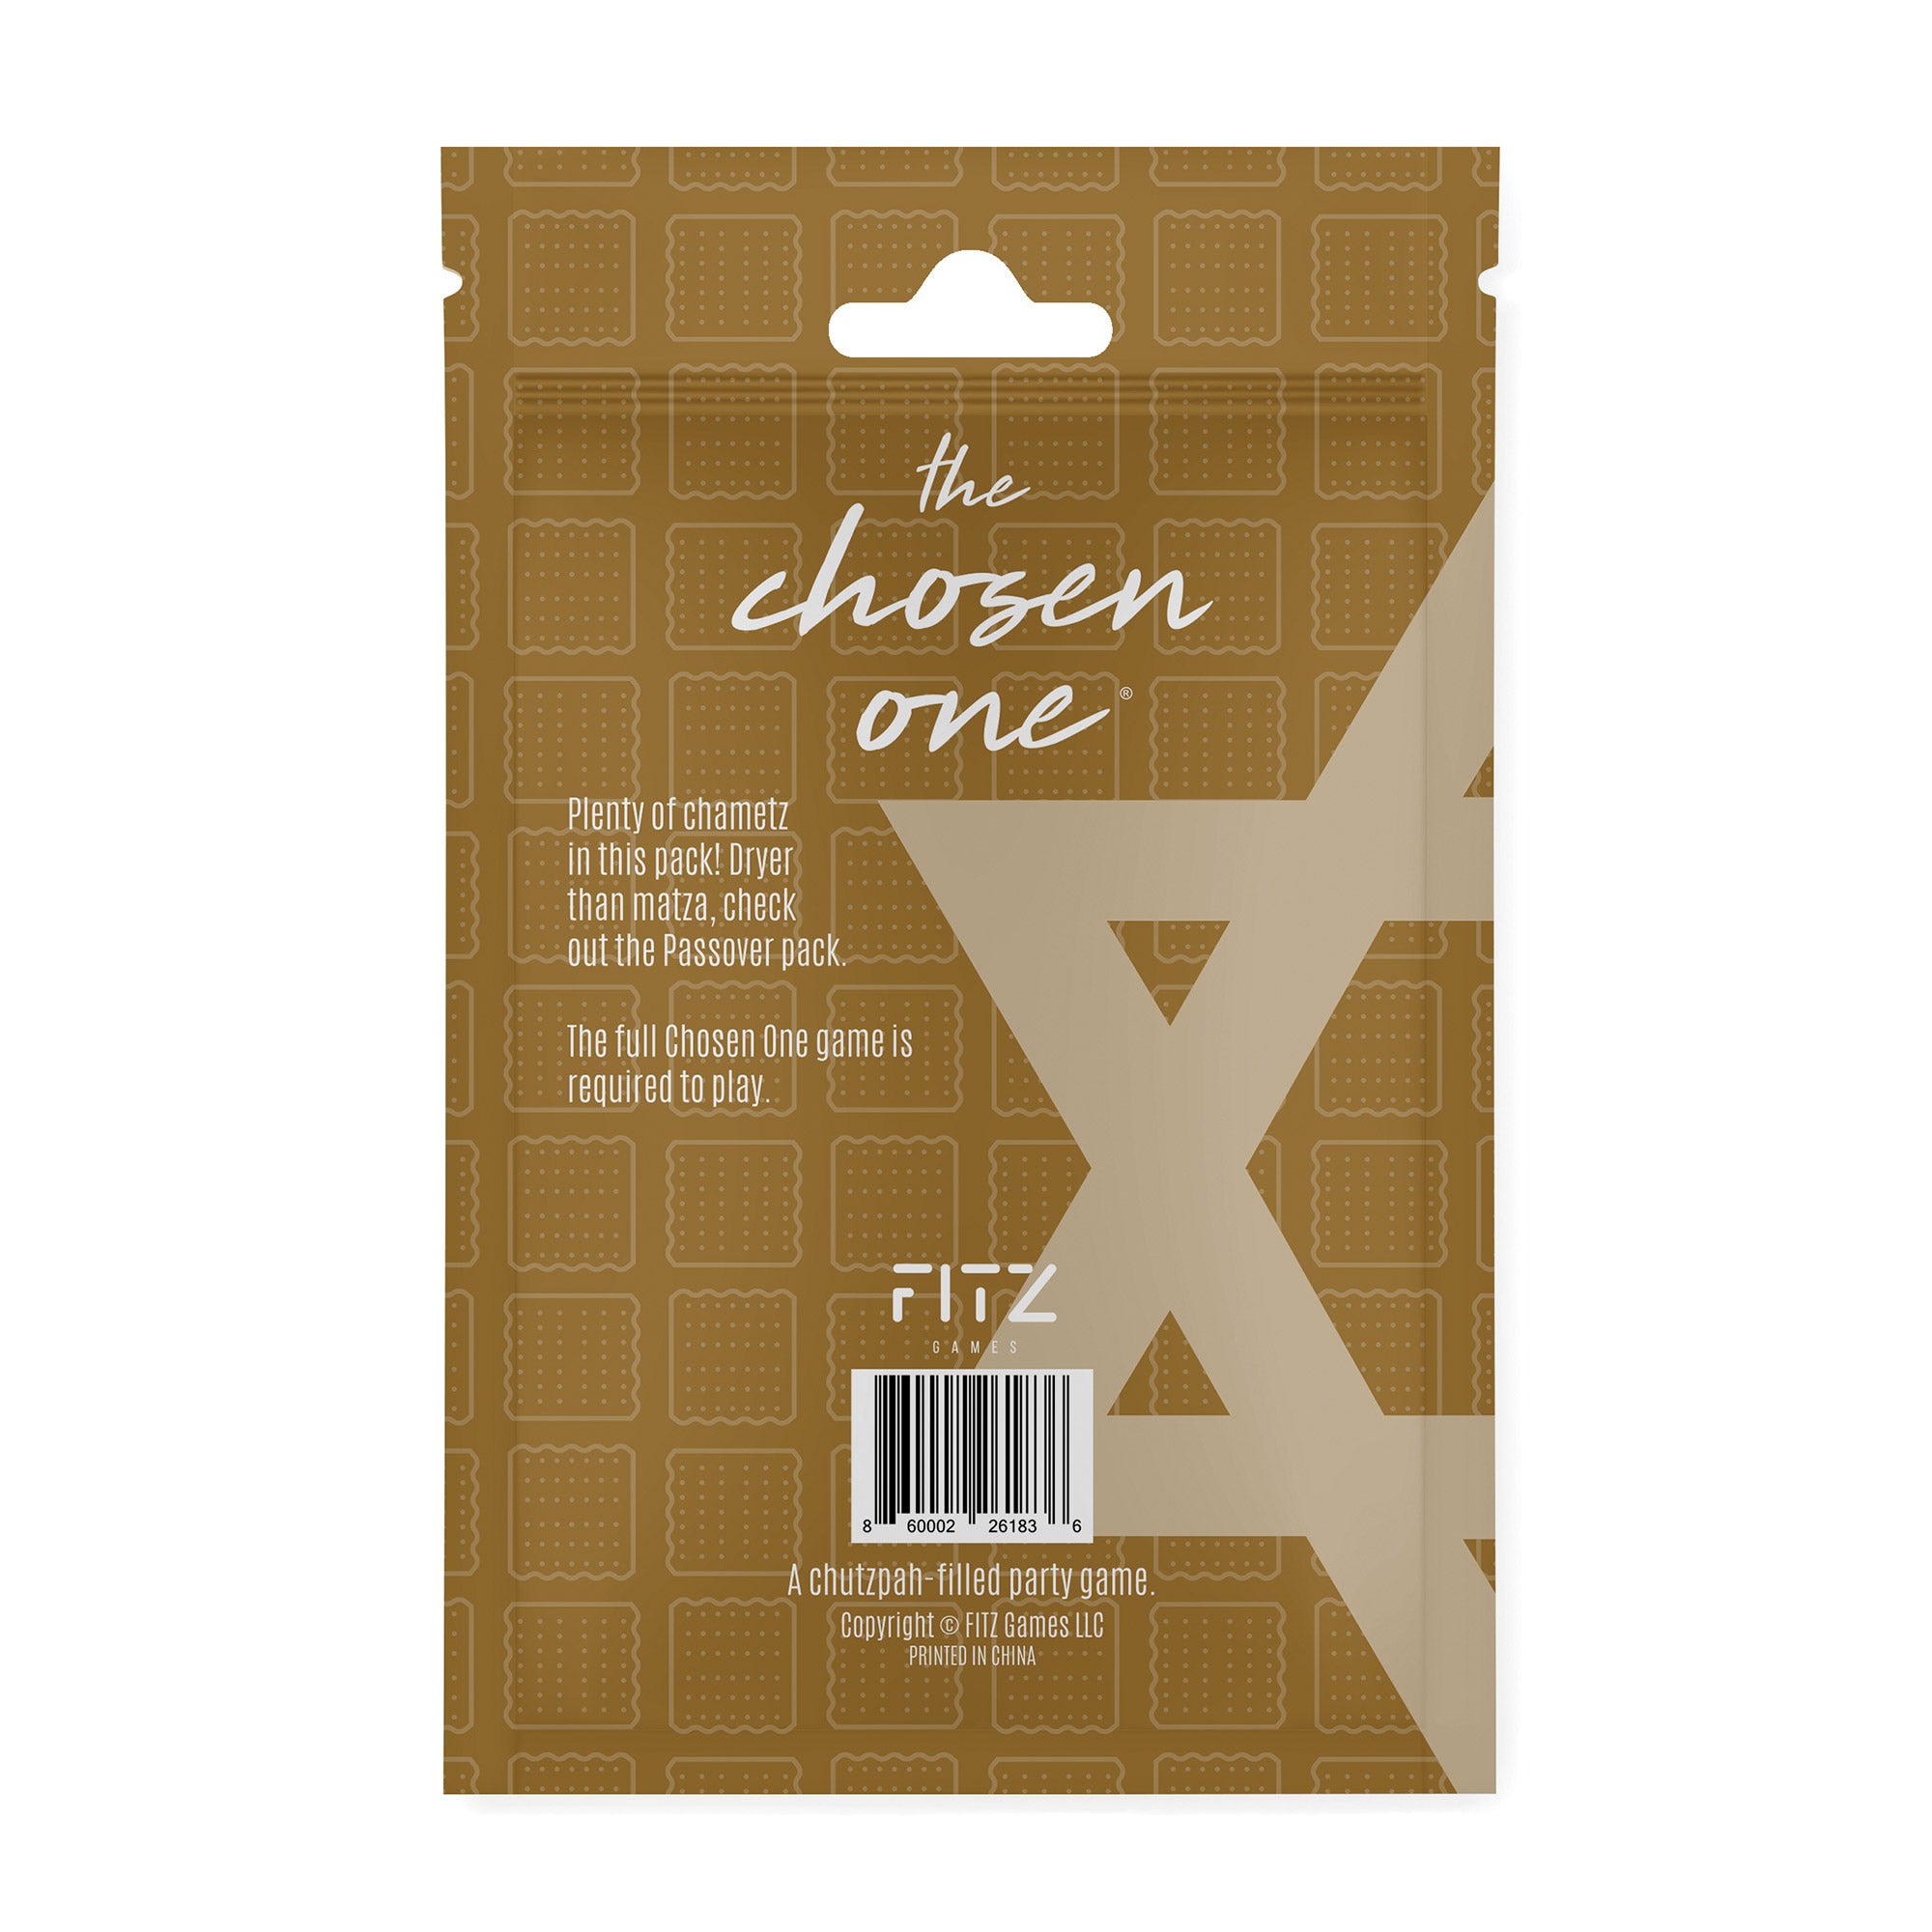 The Chosen One® - Passover